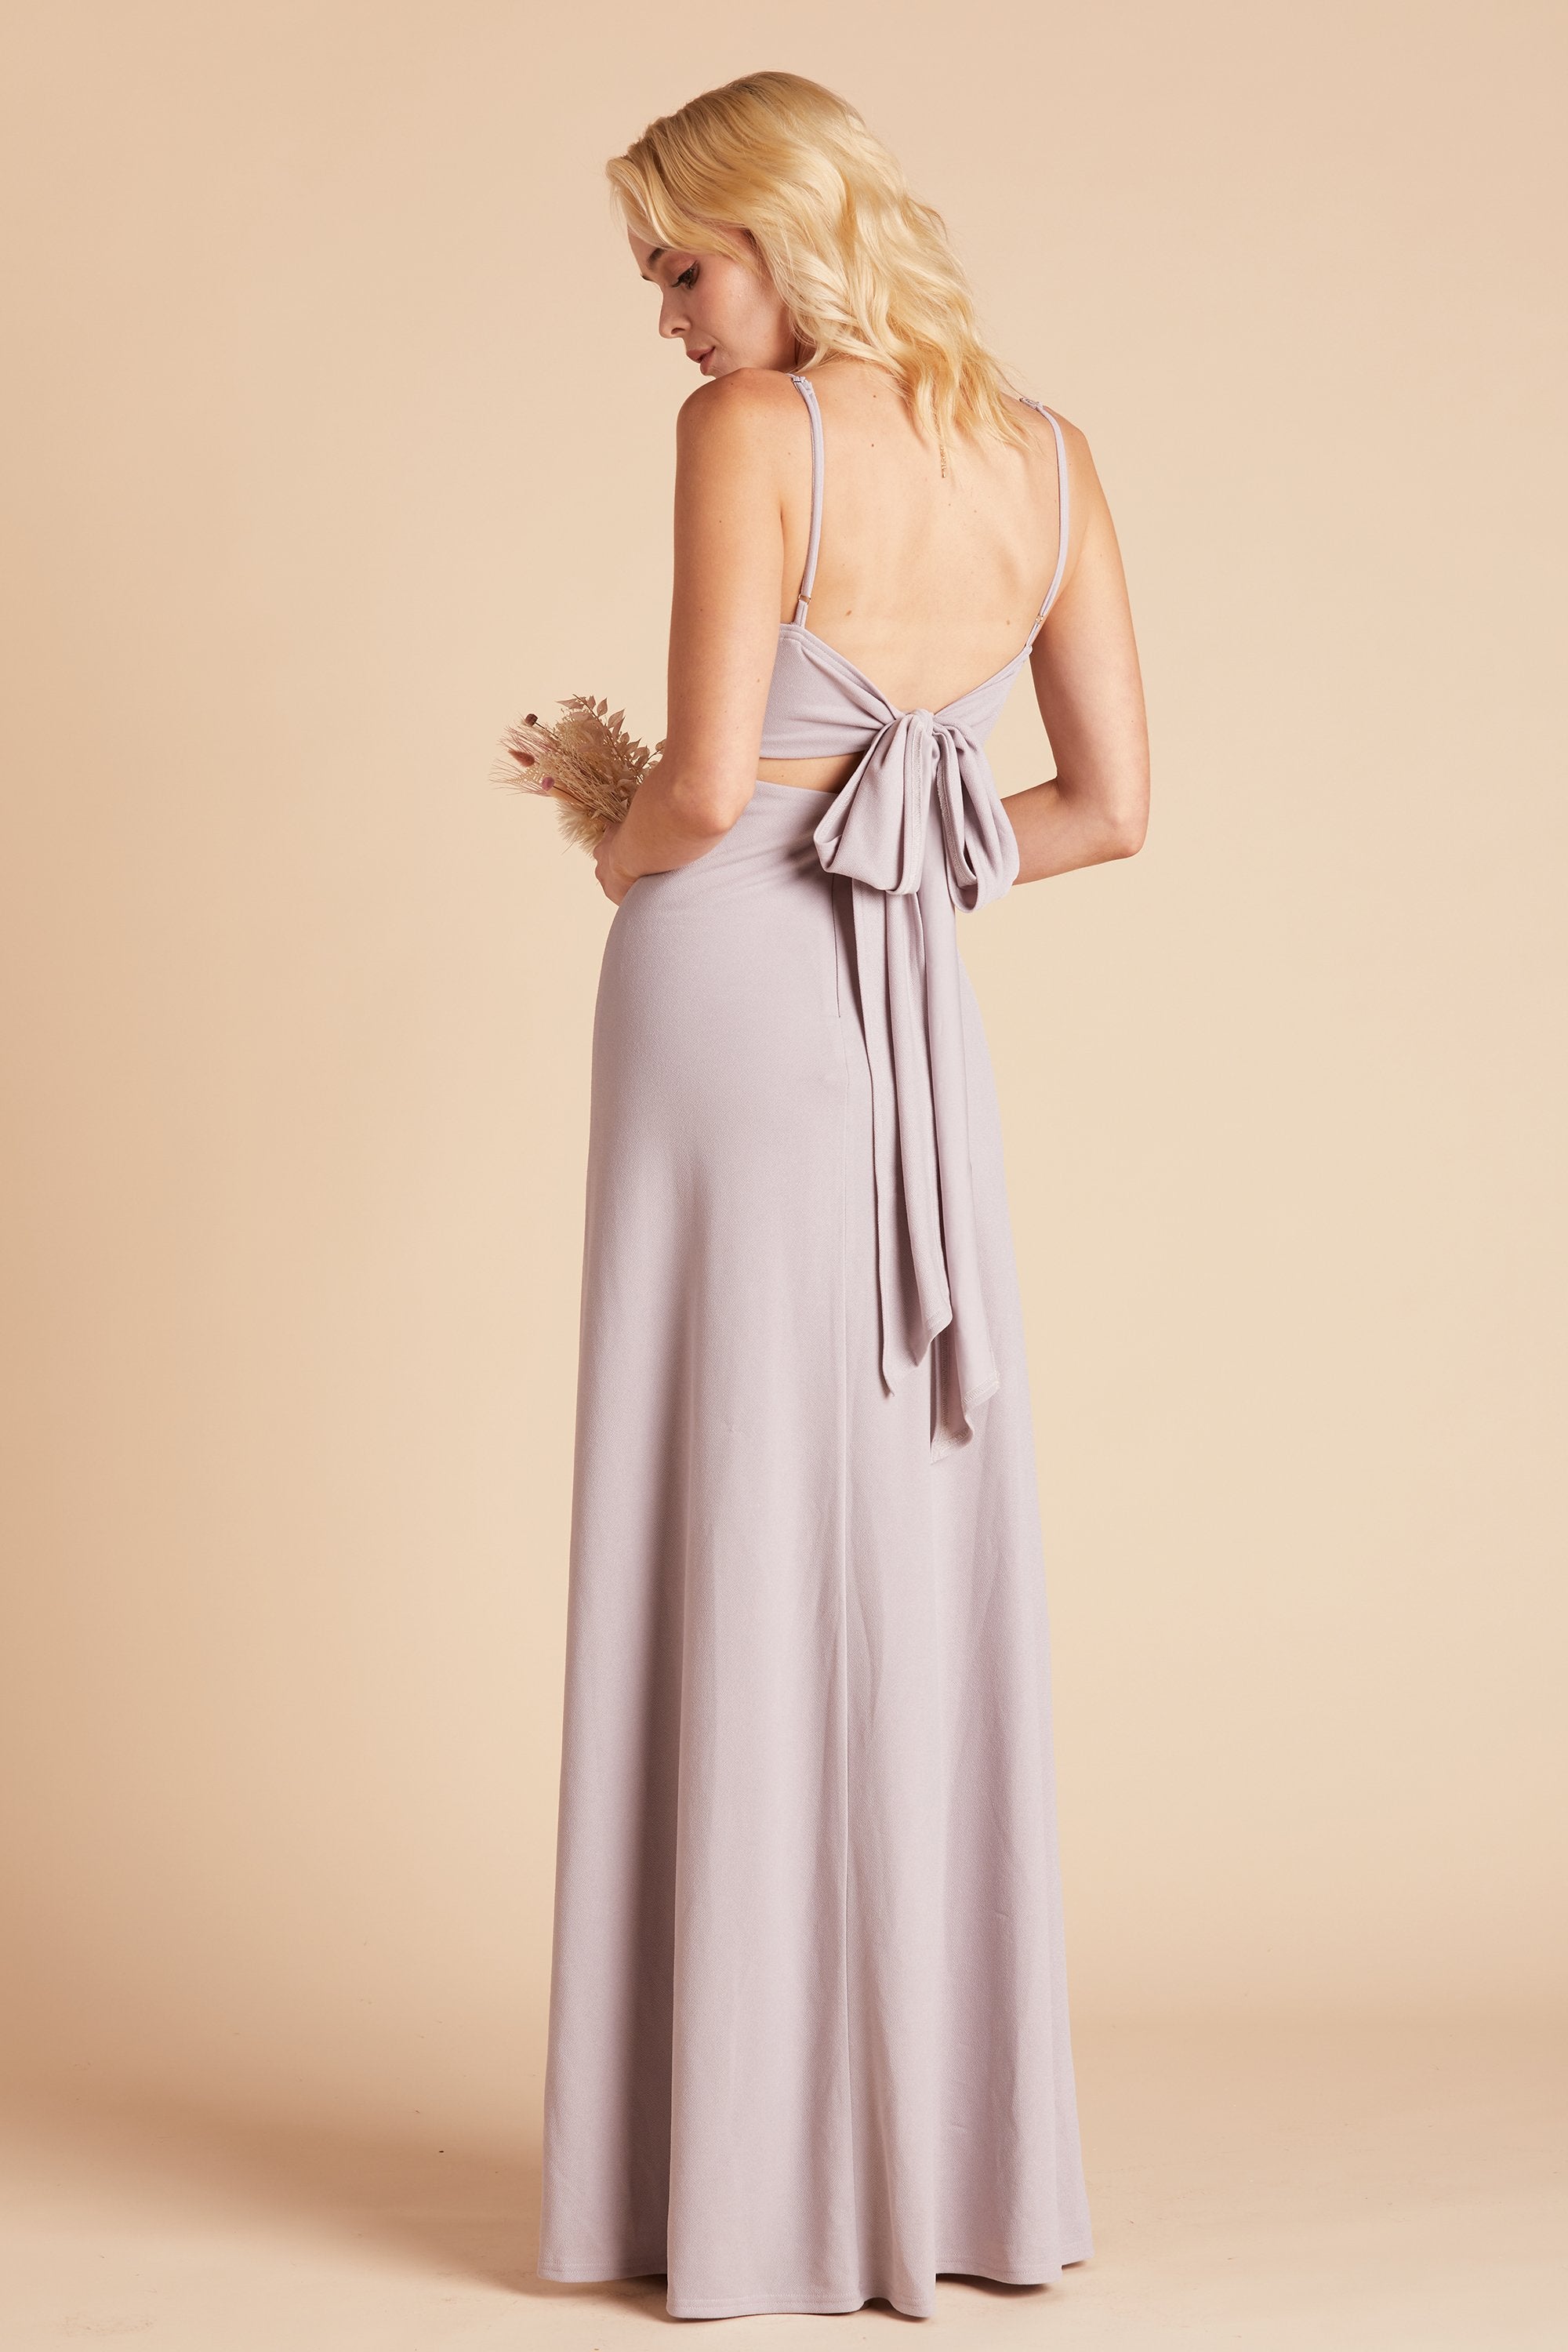 Benny bridesmaid dress in emerald green crepe by Birdy Grey, back view